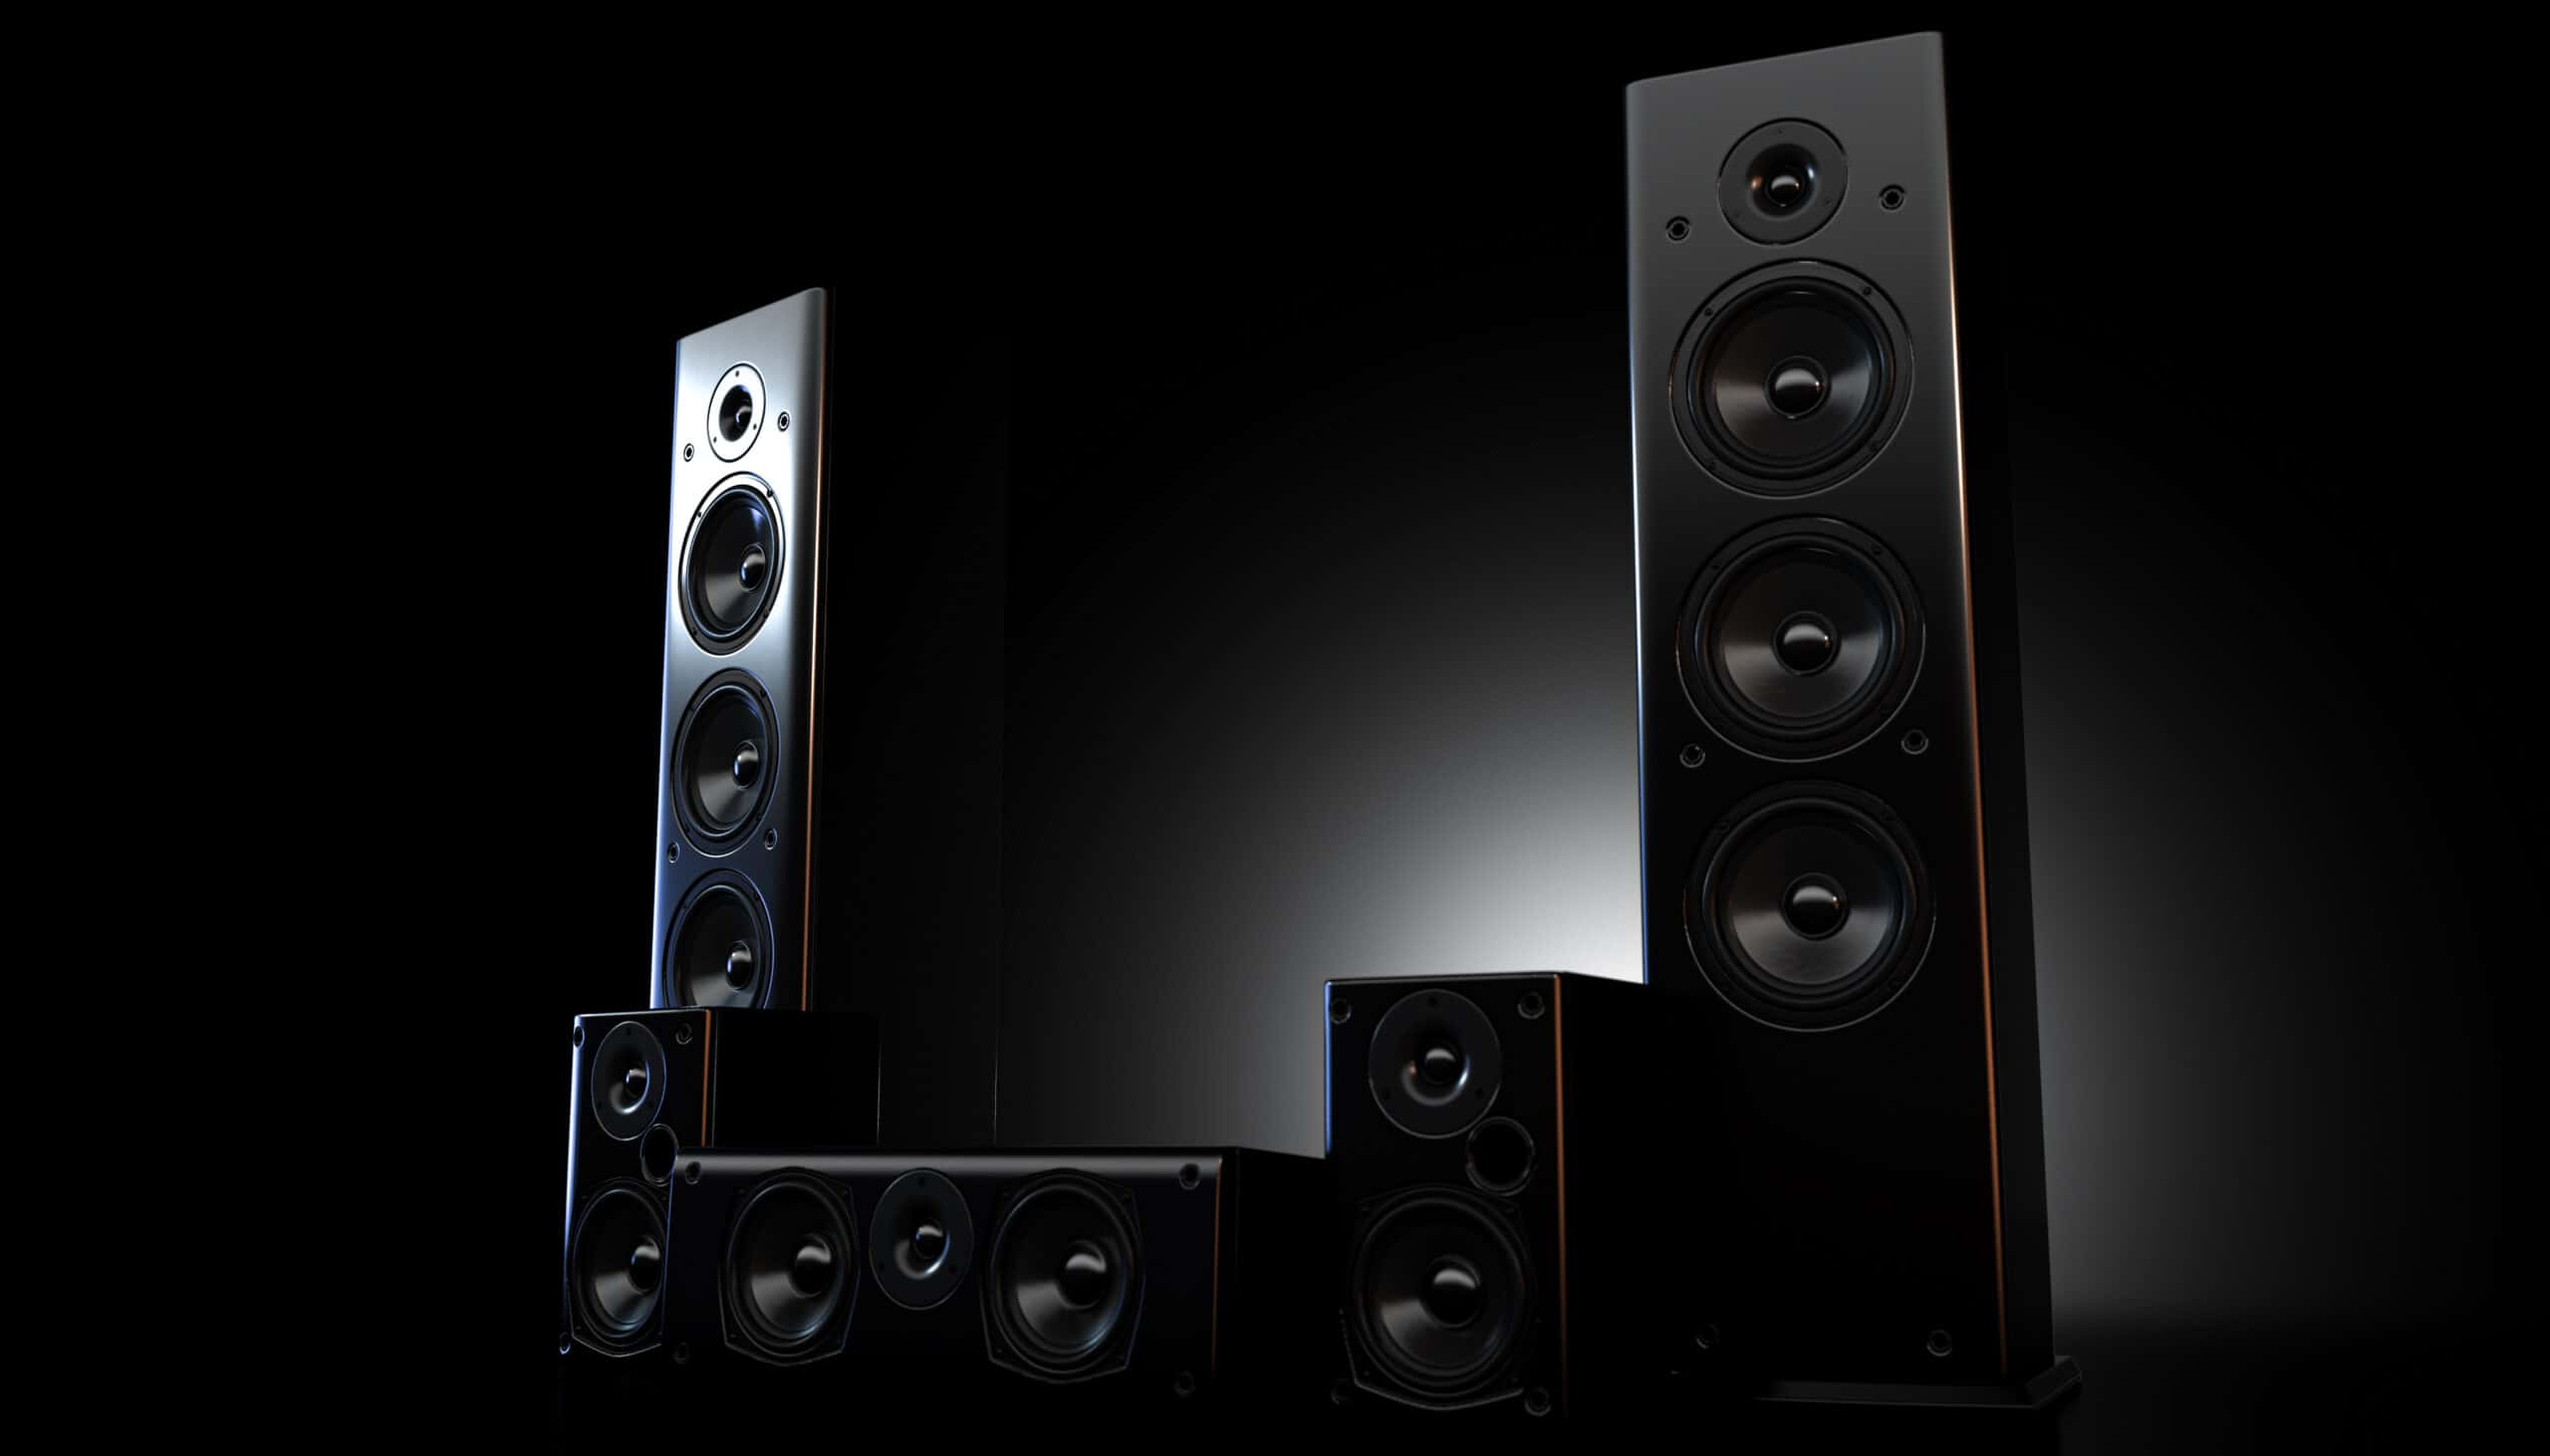 Which Speakers Are The Most Important In A Surround Sound System